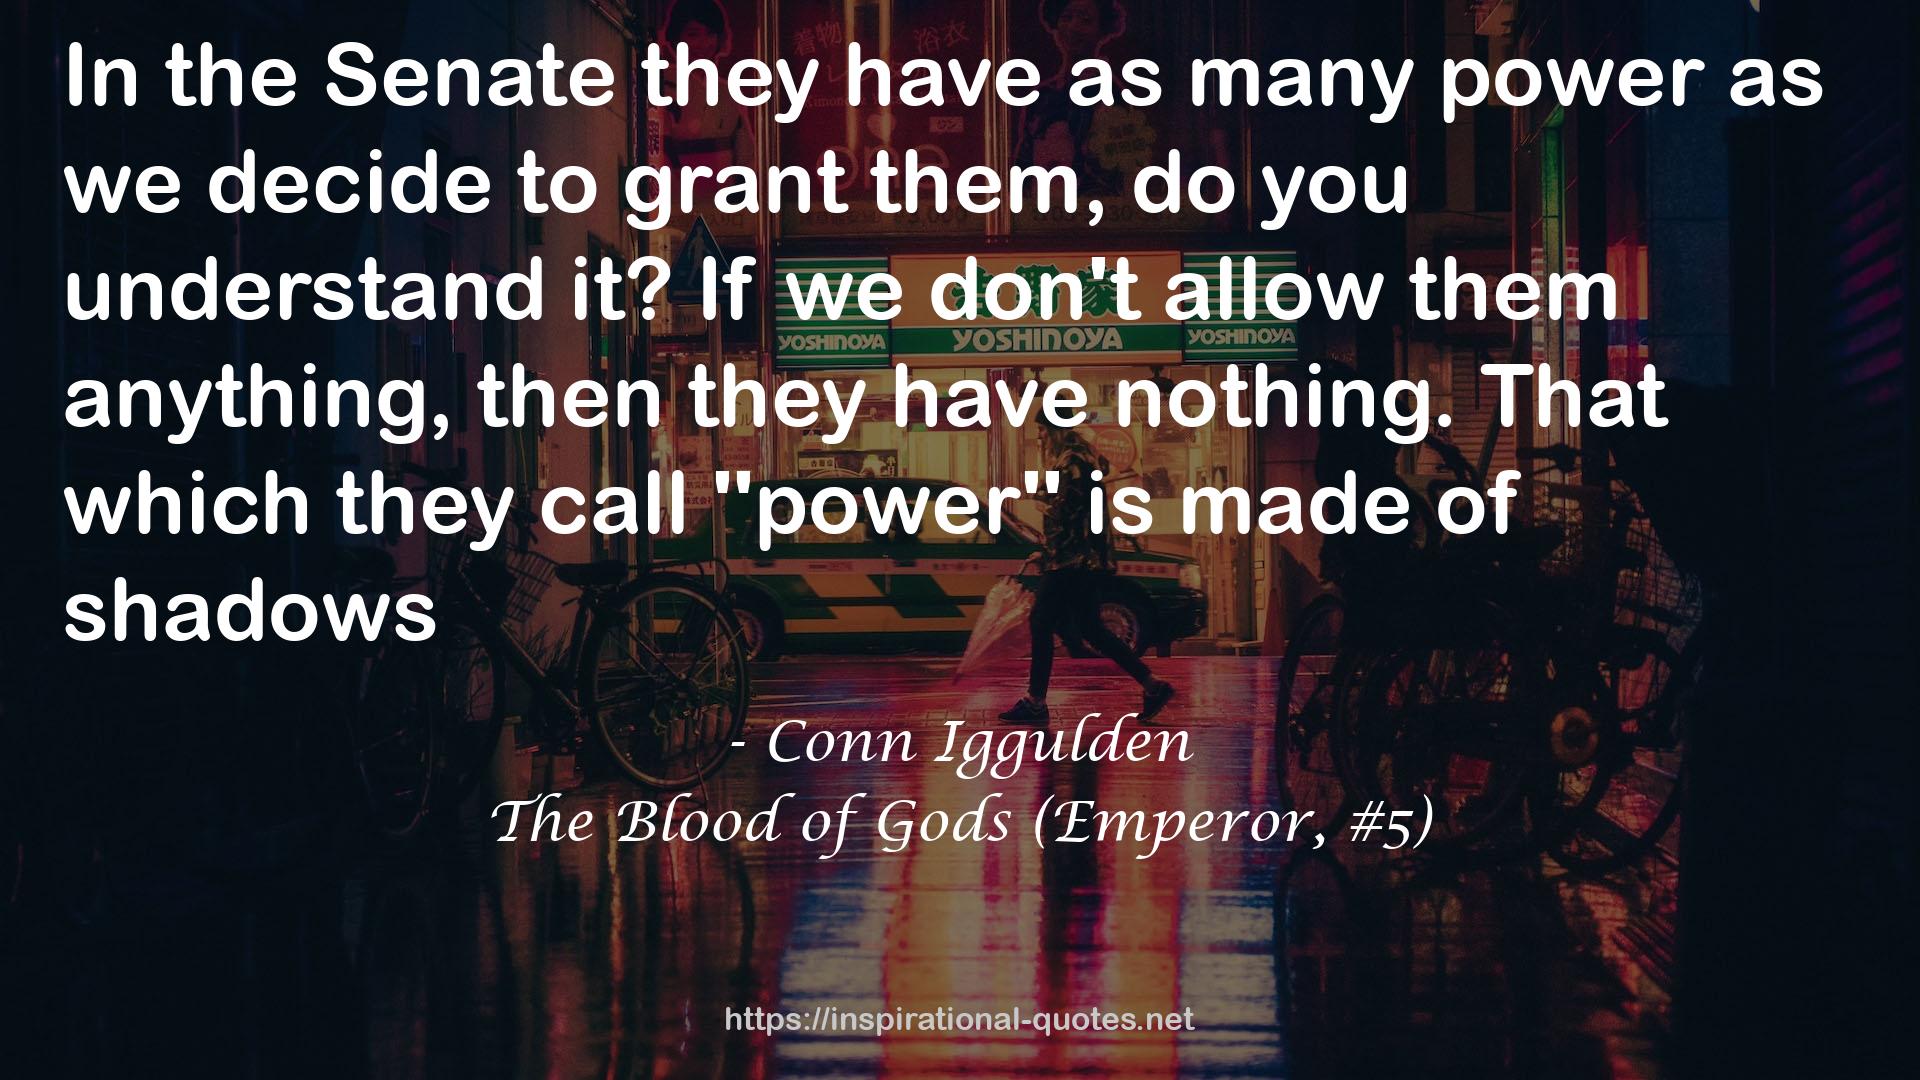 The Blood of Gods (Emperor, #5) QUOTES